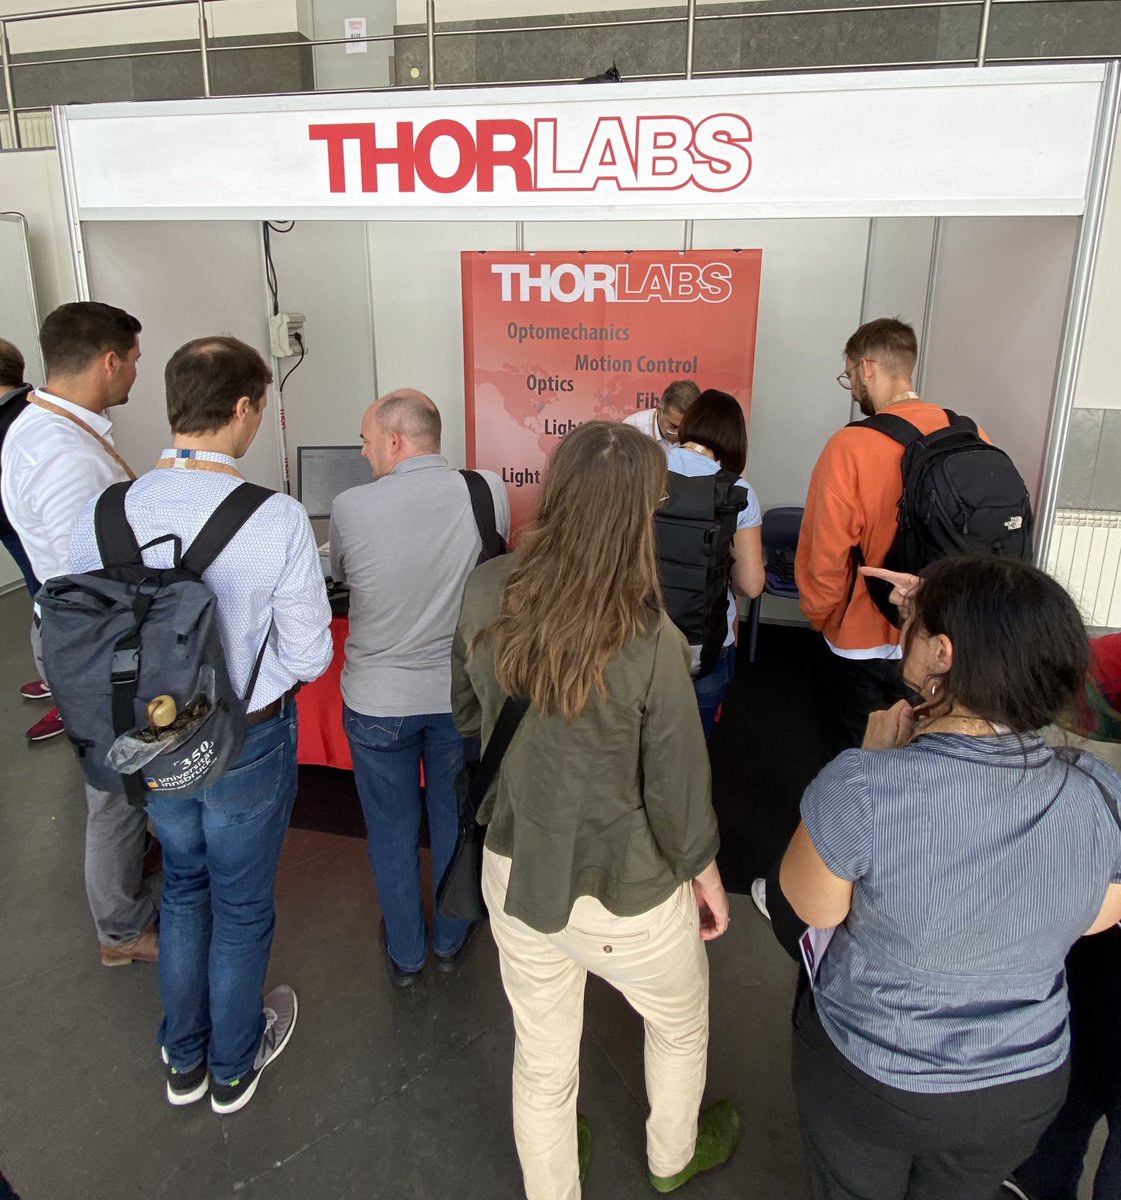 Thank you to our exhibitors at #EOSAM2022!

The buzzing around the booths was loud all week long, we hope you enjoyed the conference as much as we did. We hope to see you in Dijon, France next year for #EOSAM2023 @TOPTICA_AG @GLOphotonics @SpherePhotonics @Thorlabs